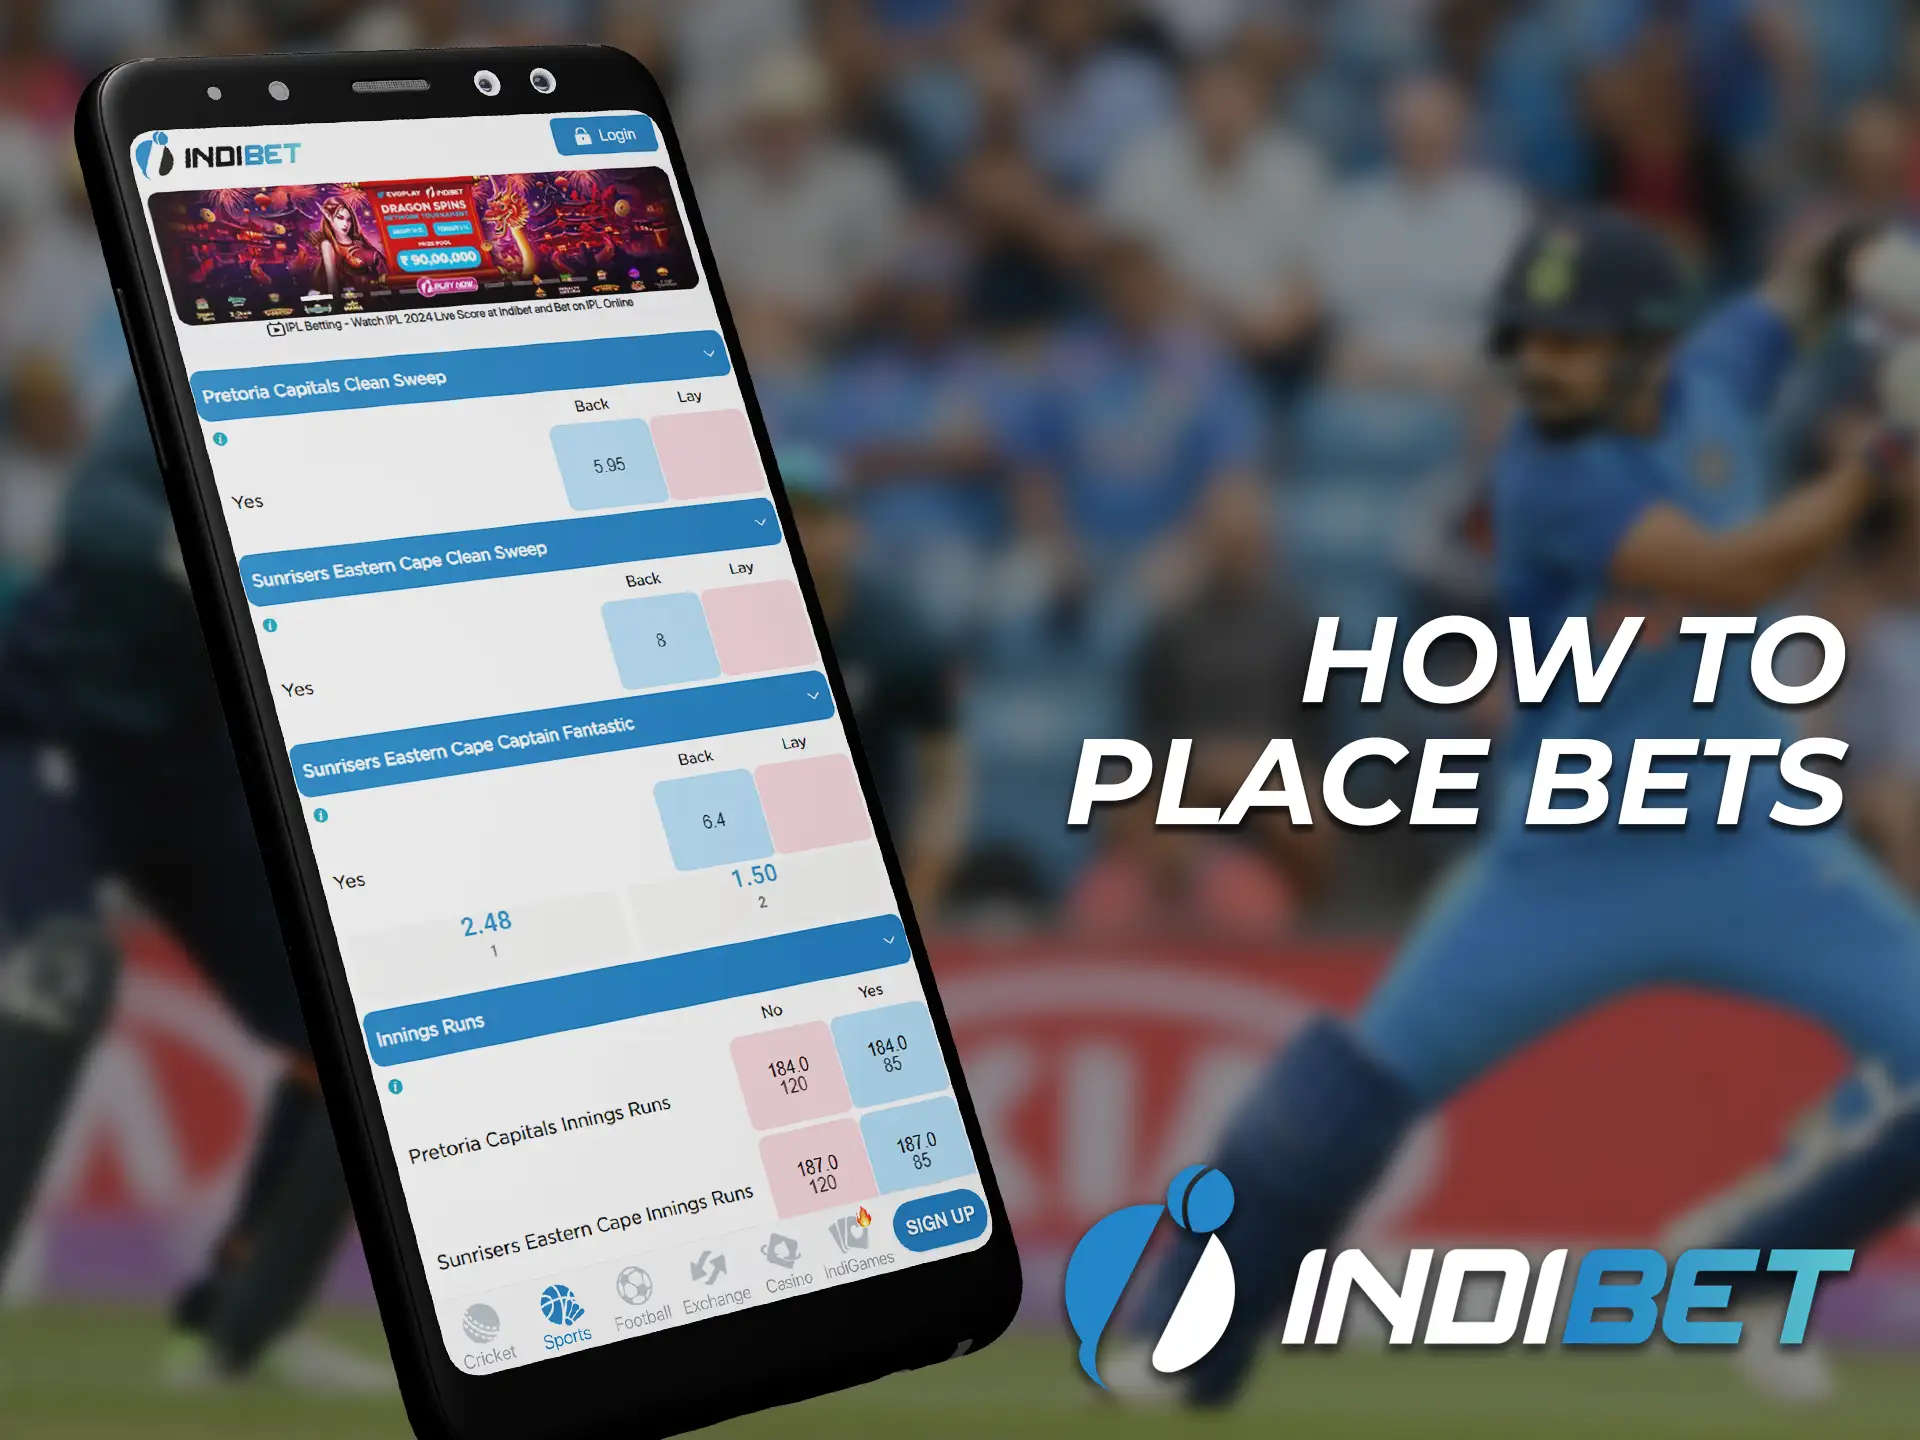 You can start betting on the Indibet app immediately after making a deposit.